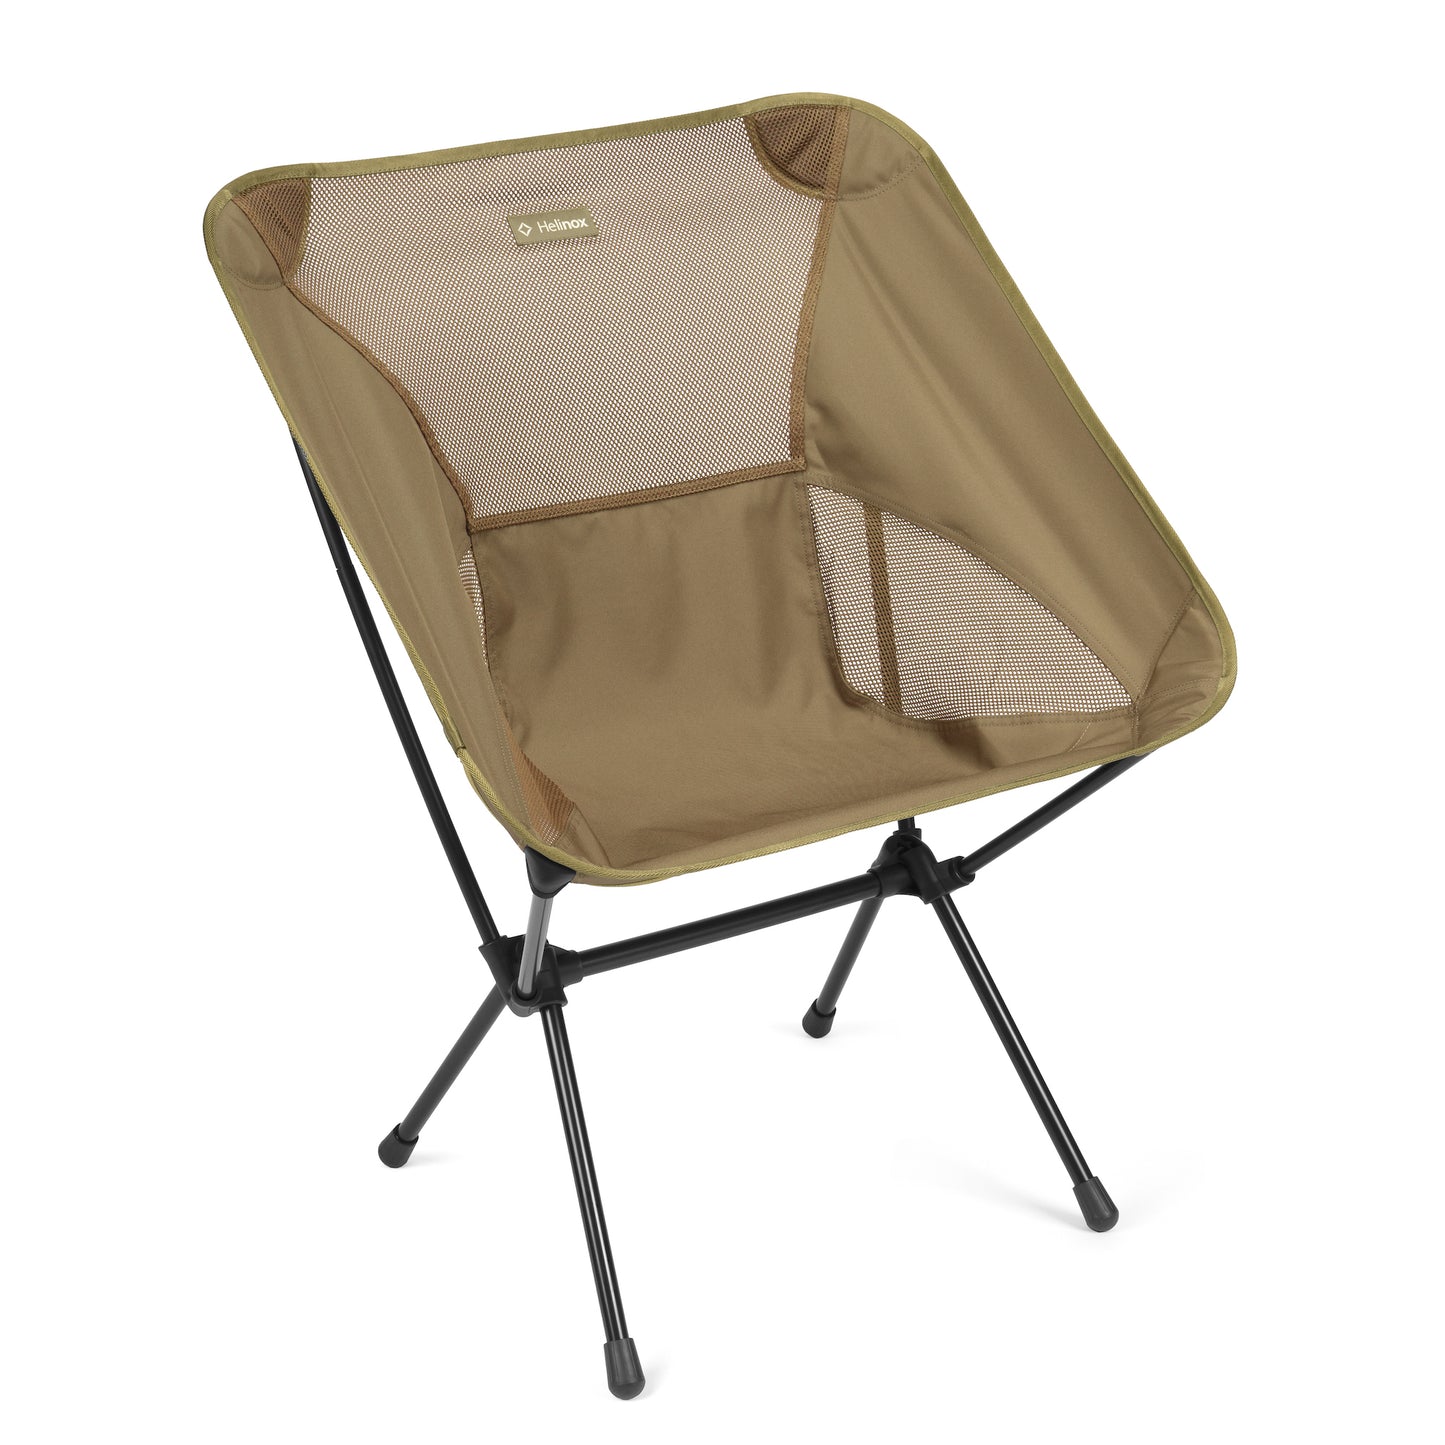 Chair One XL - Coyote Tan